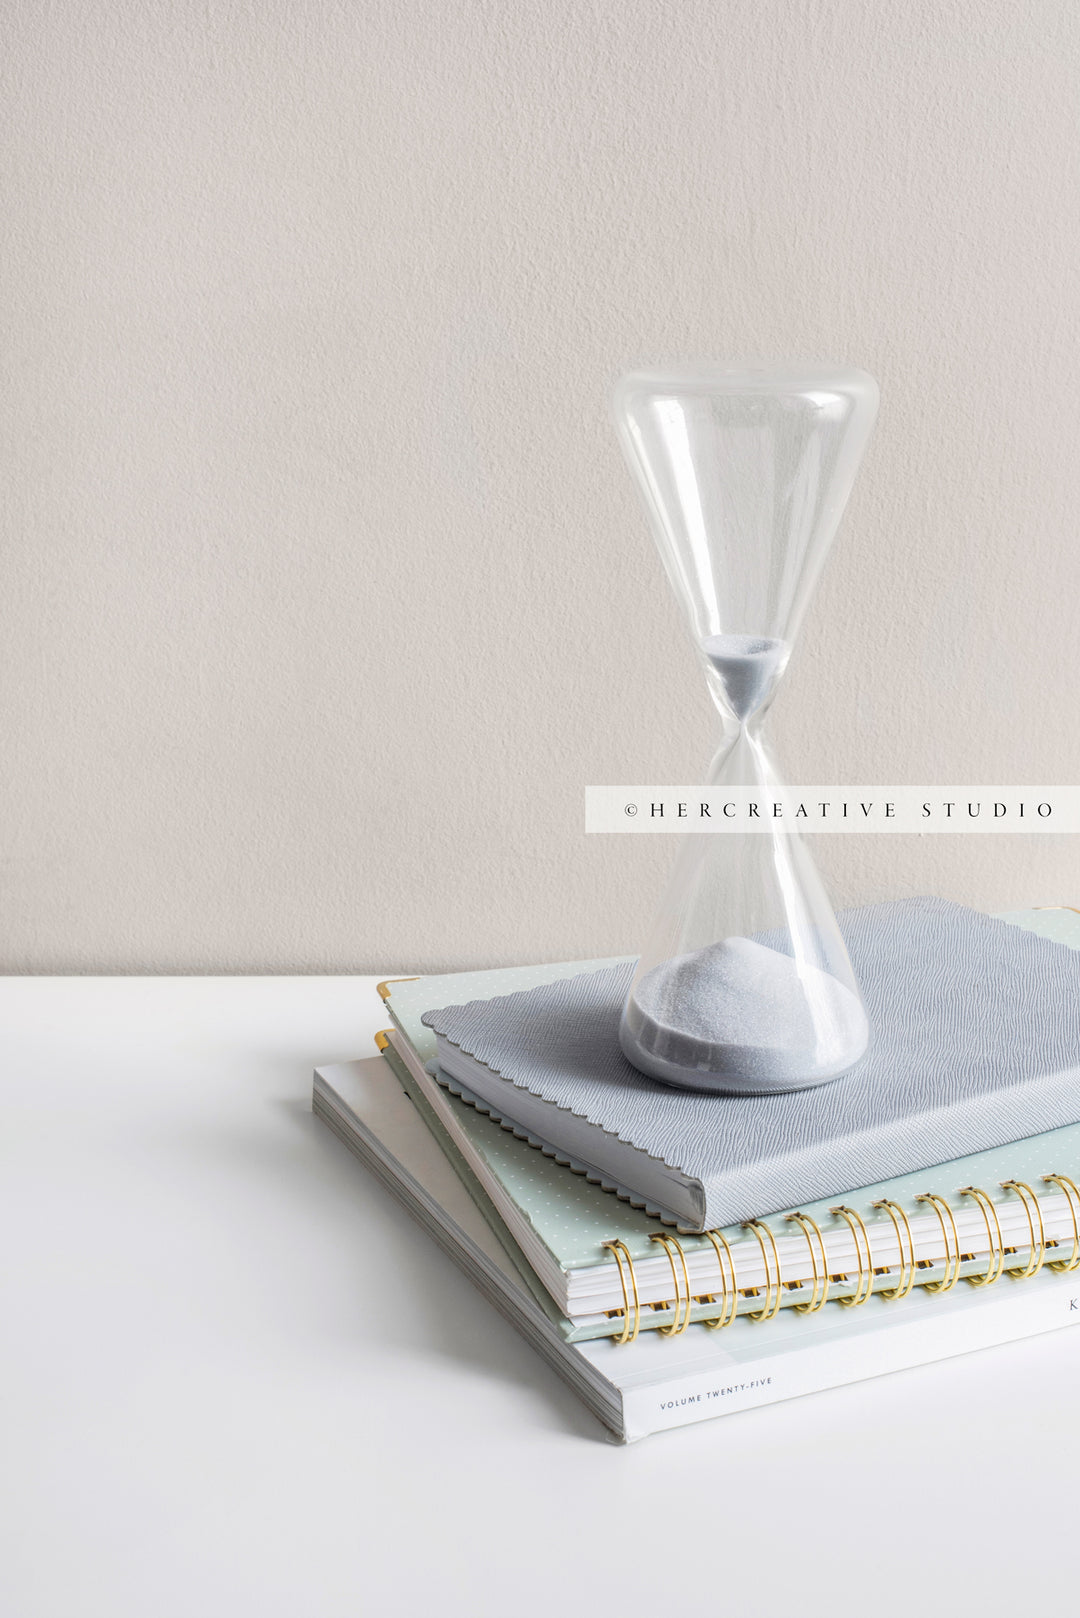 Hourglass on a Stack of Notebooks. Stock Image